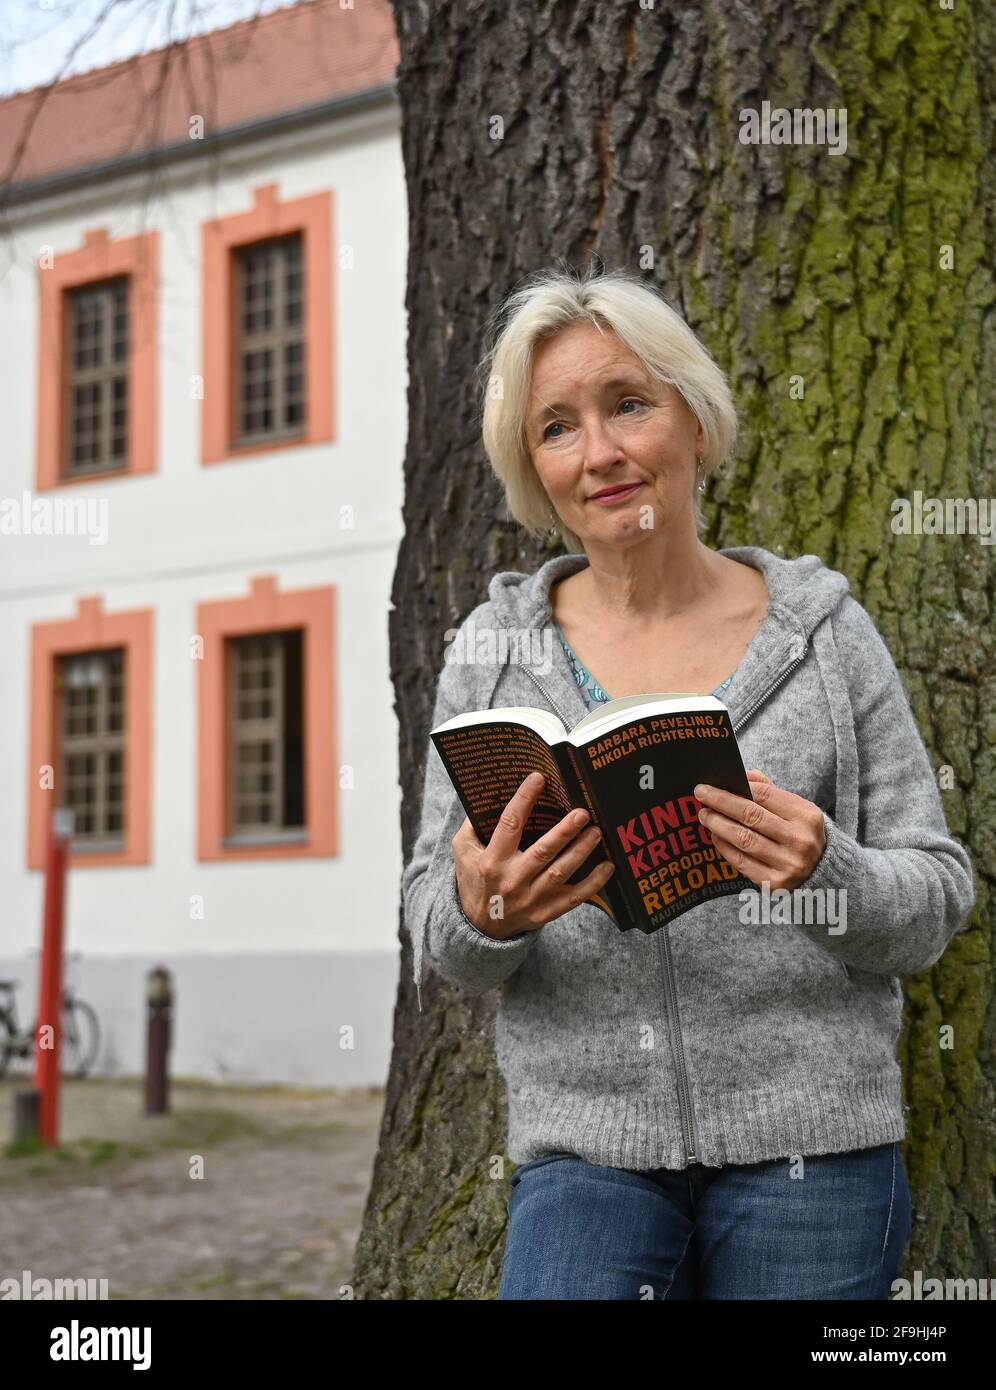 14 April 2021, Brandenburg, Beeskow: Martine Müller-Lombard, author, stands in the courtyard of Beeskow Castle. Since the beginning of January 2021, the new castle writer, Martine Müller-Lombard, has moved into Beeskow Castle. The Dresden native, who was selected by a jury from a good 50 applicants, has lived in France for many years. She learned about the call for entries through Mitteldeutscher Verlag, which published her debut novel 'Wir schenken uns nichts' in 2019. In Beeskow, Martine Müller-Lombard wants to work again on her short stories, for which a French publisher from Alsace is inte Stock Photo